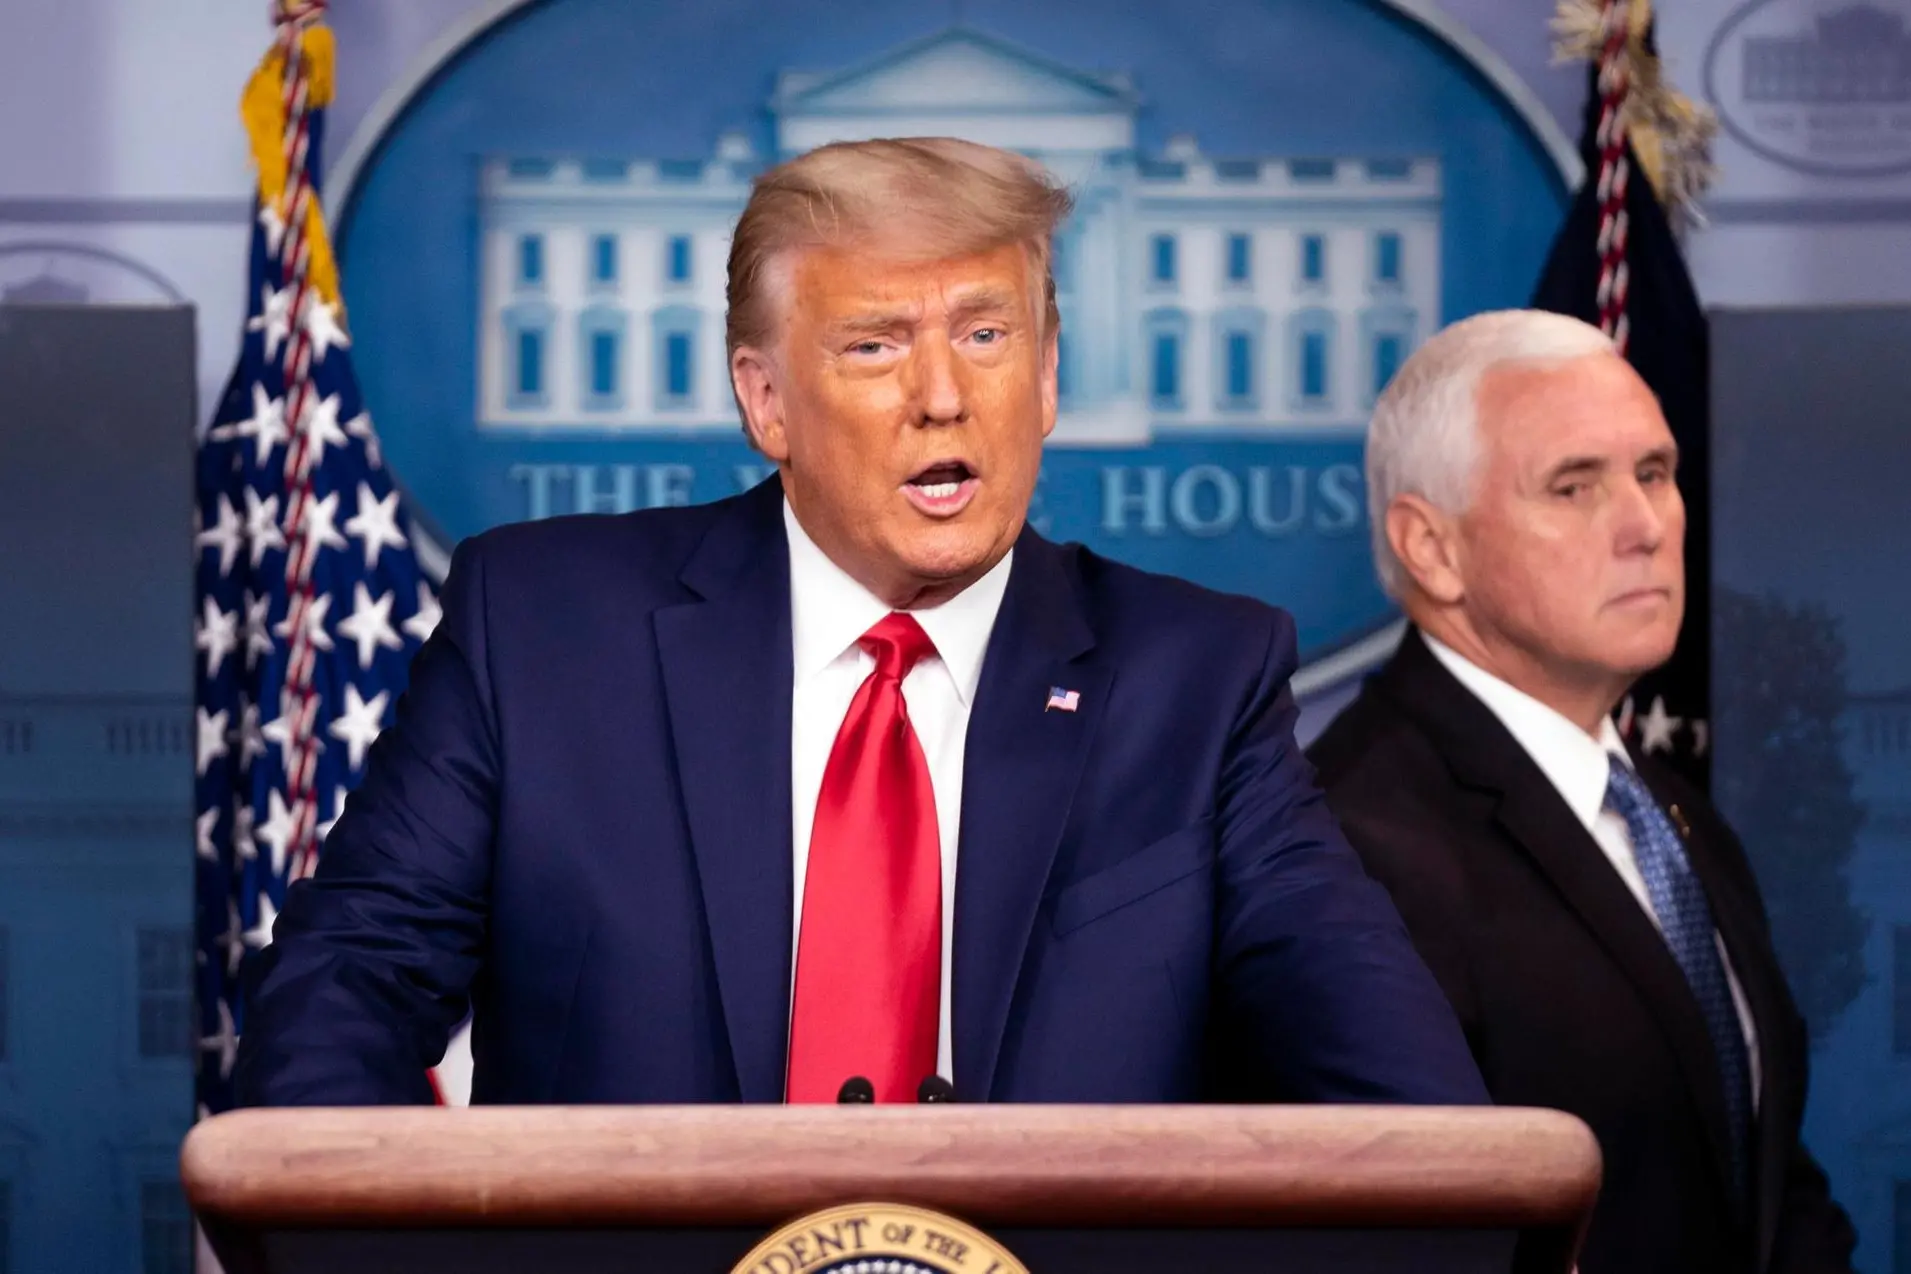 epa08839525 US President Donald J. Trump joined by Vice President Mike Pence (R), delivers brief remarks on the stock market and the Dow reaching 30,000 for the first time in history, at the White House in Washington, DC, USA, 24 November 2020. EPA/KEVIN DIETSCH / POOL